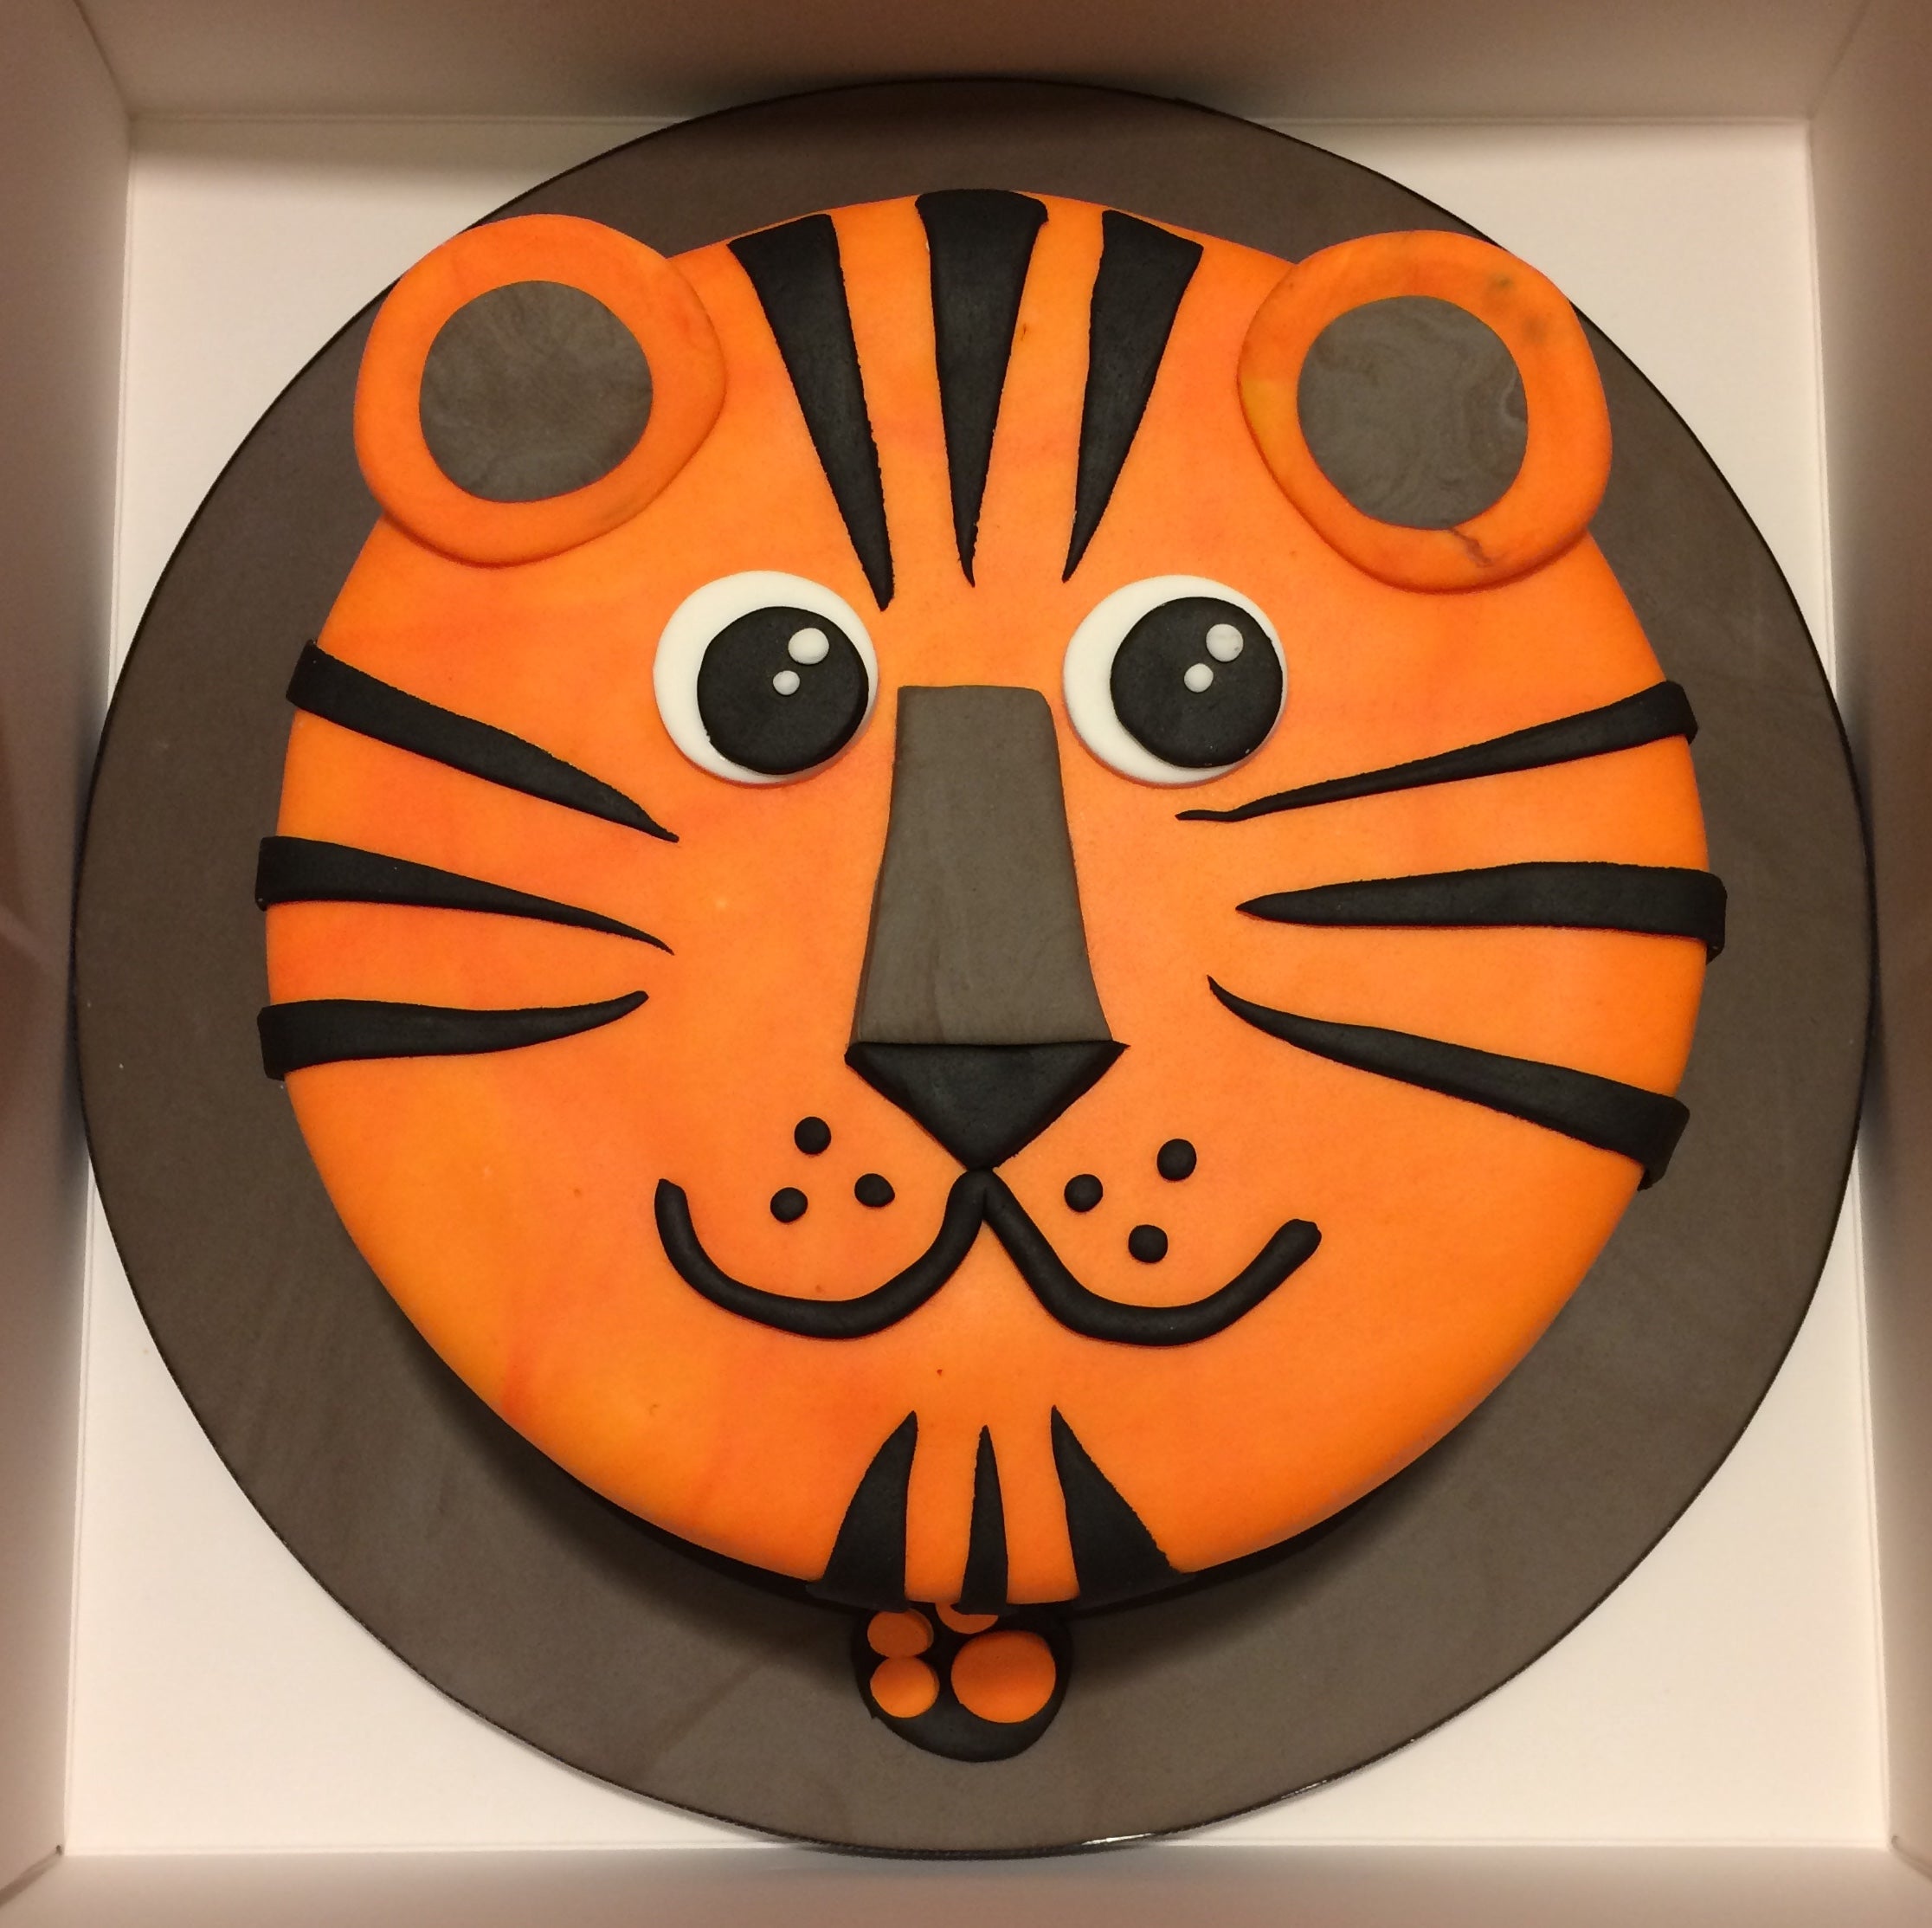 Cute Tiger Cake Design In The Style Of by AiArtShop on DeviantArt